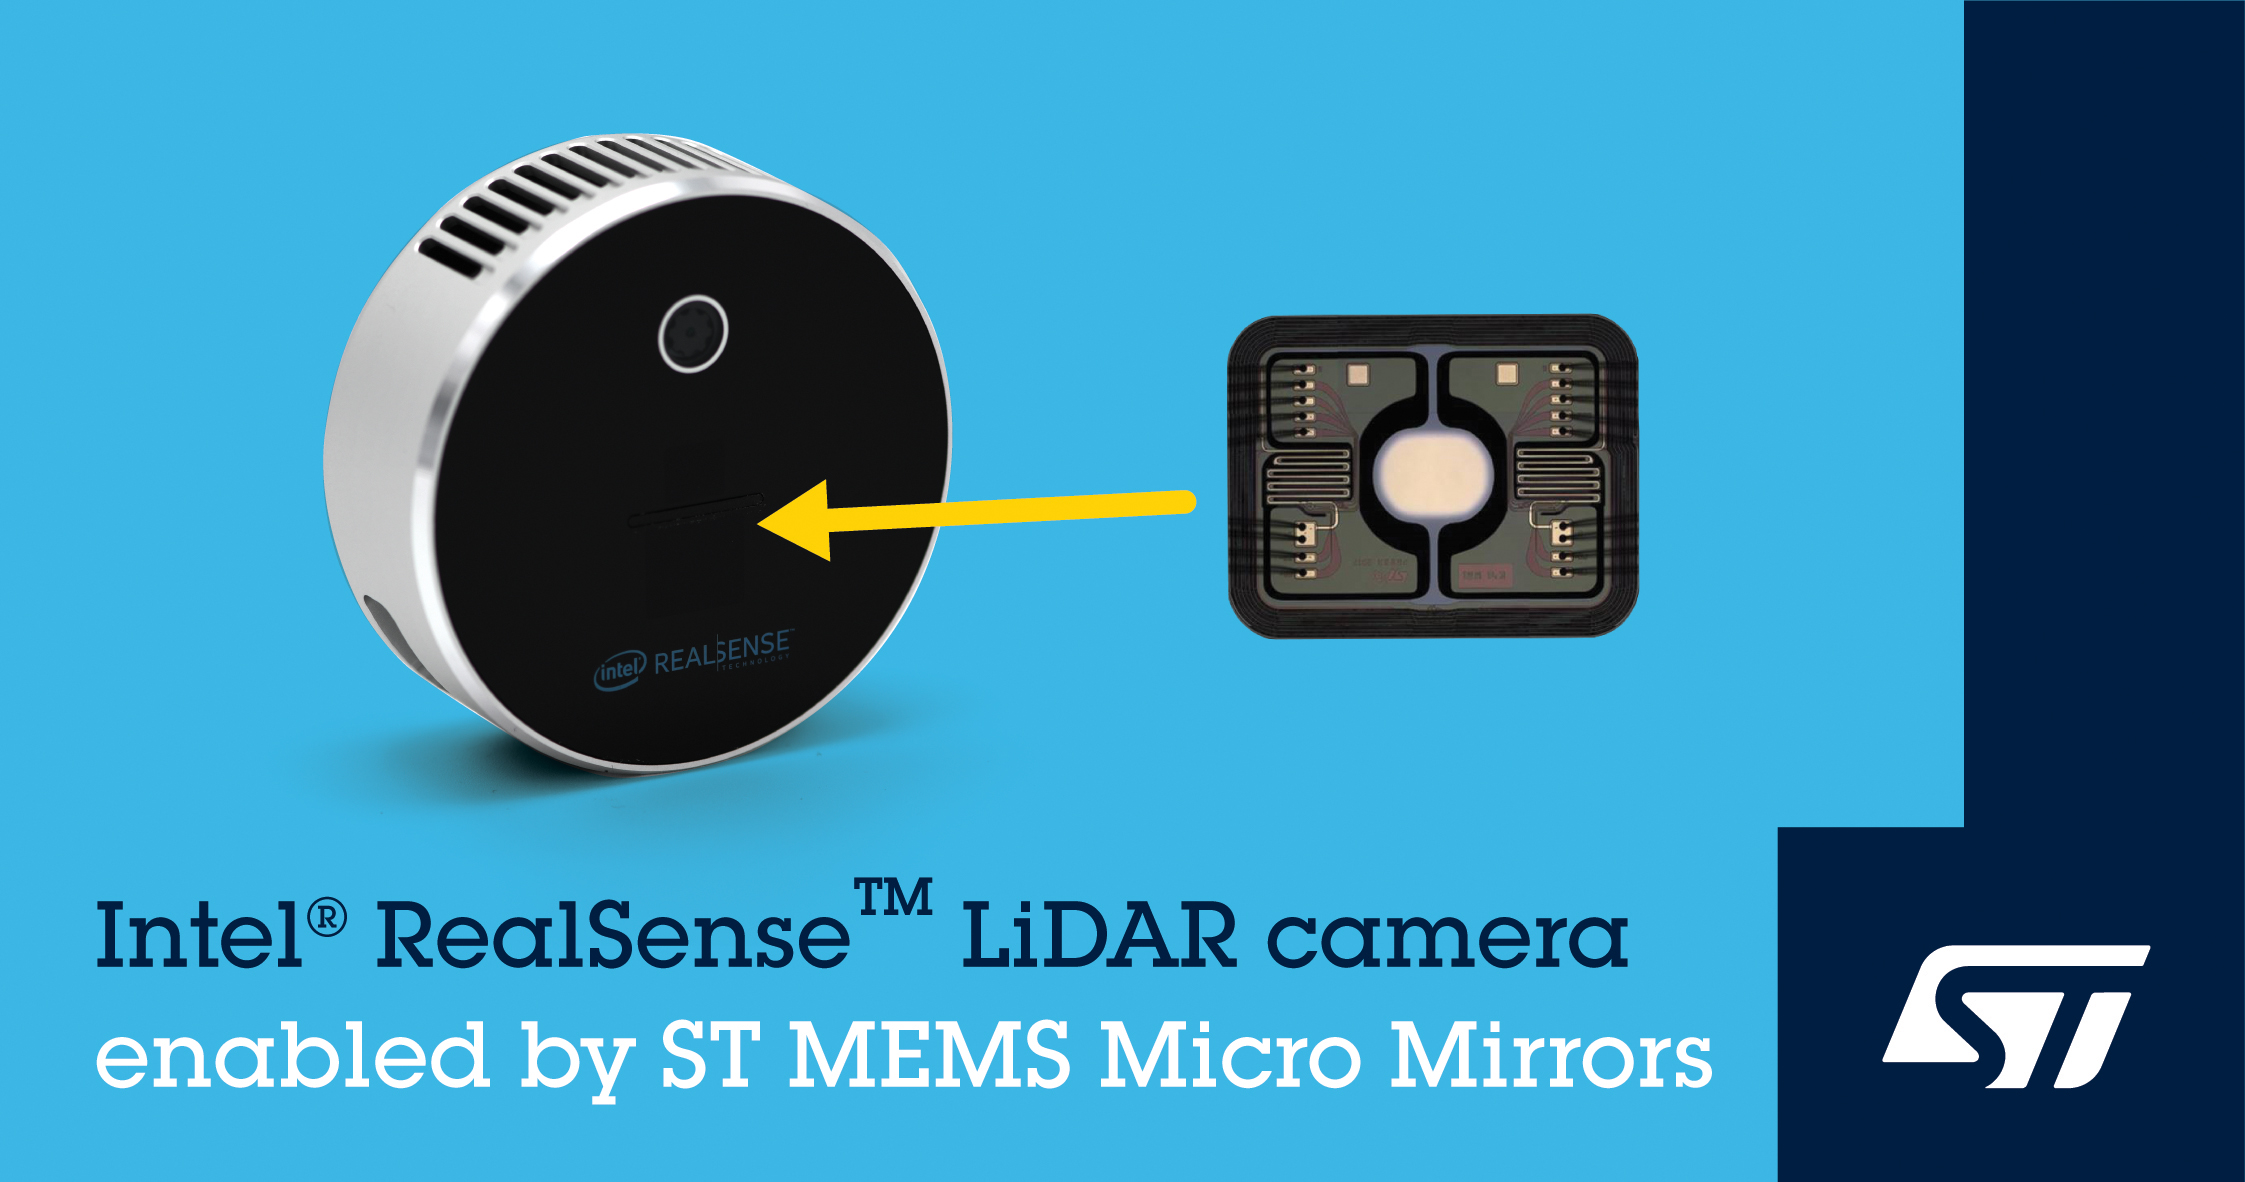 World's Smallest Micro-Mirror Scanning Technology from